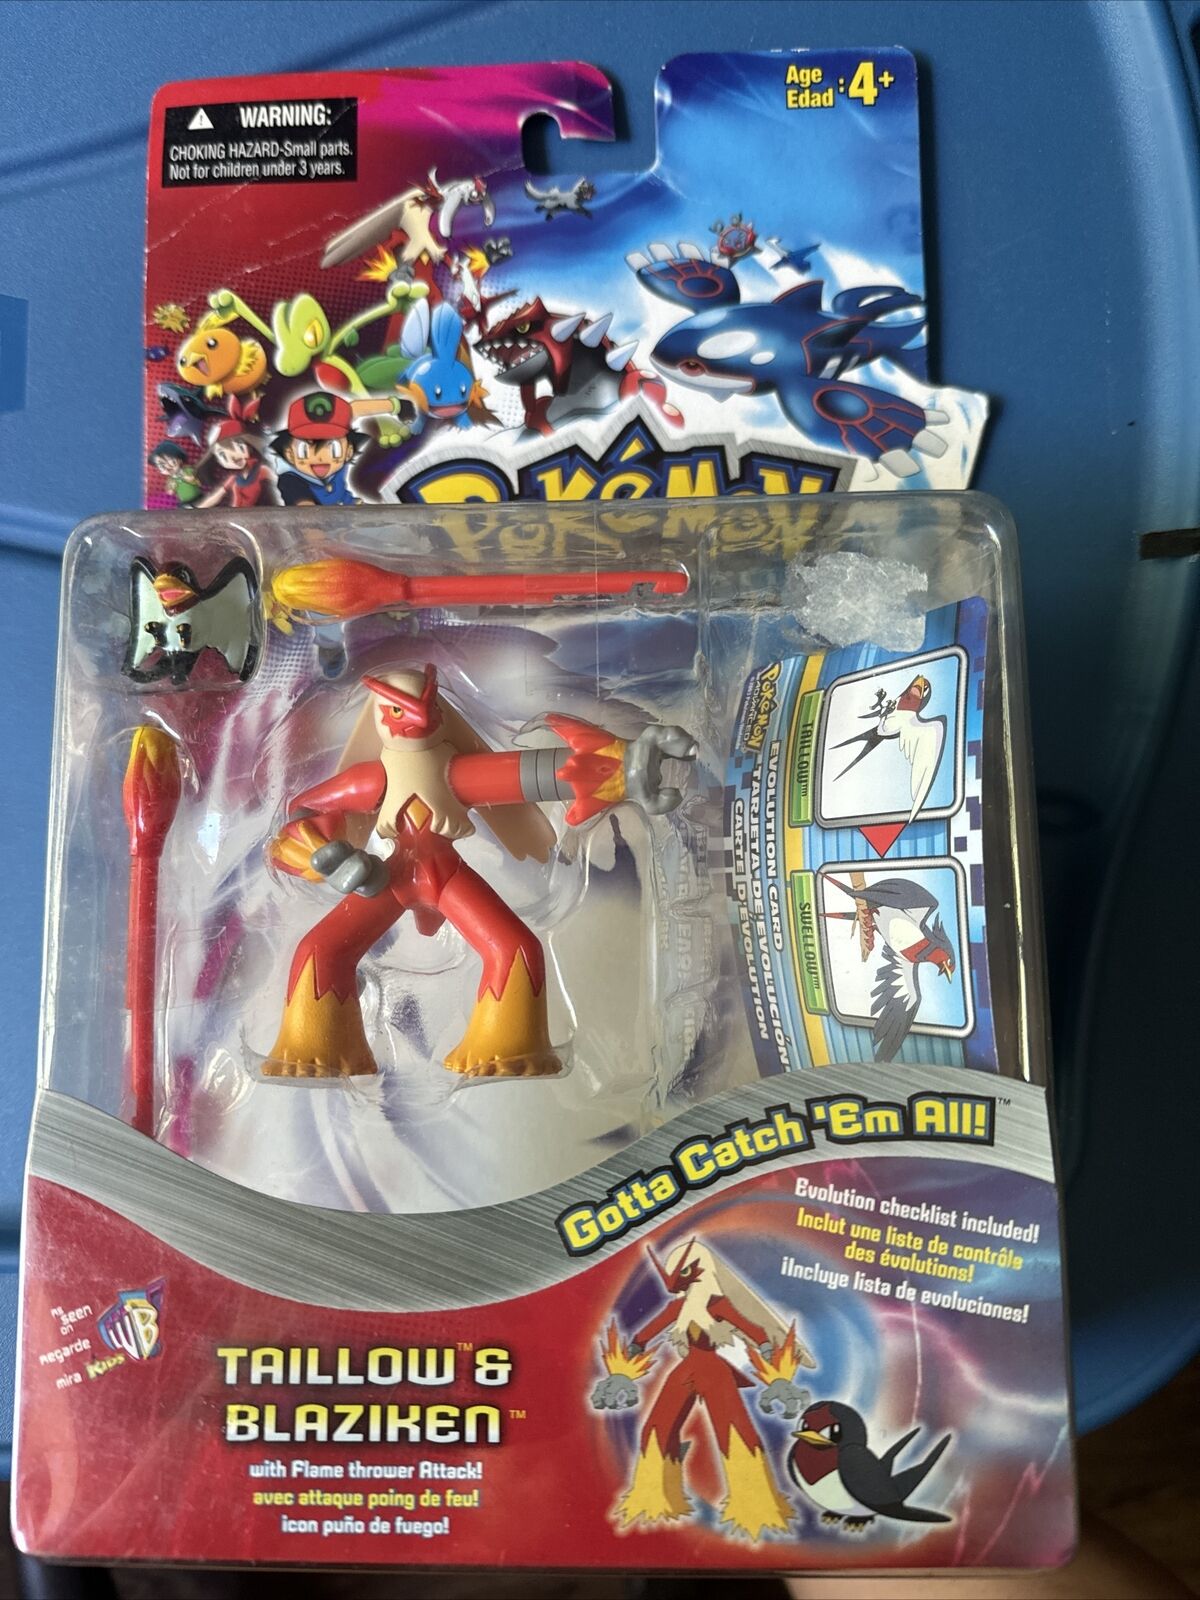 2003 Hasbro Pokemon Advanced Taillow & Blaziken with Flame Thrower Attack Figure